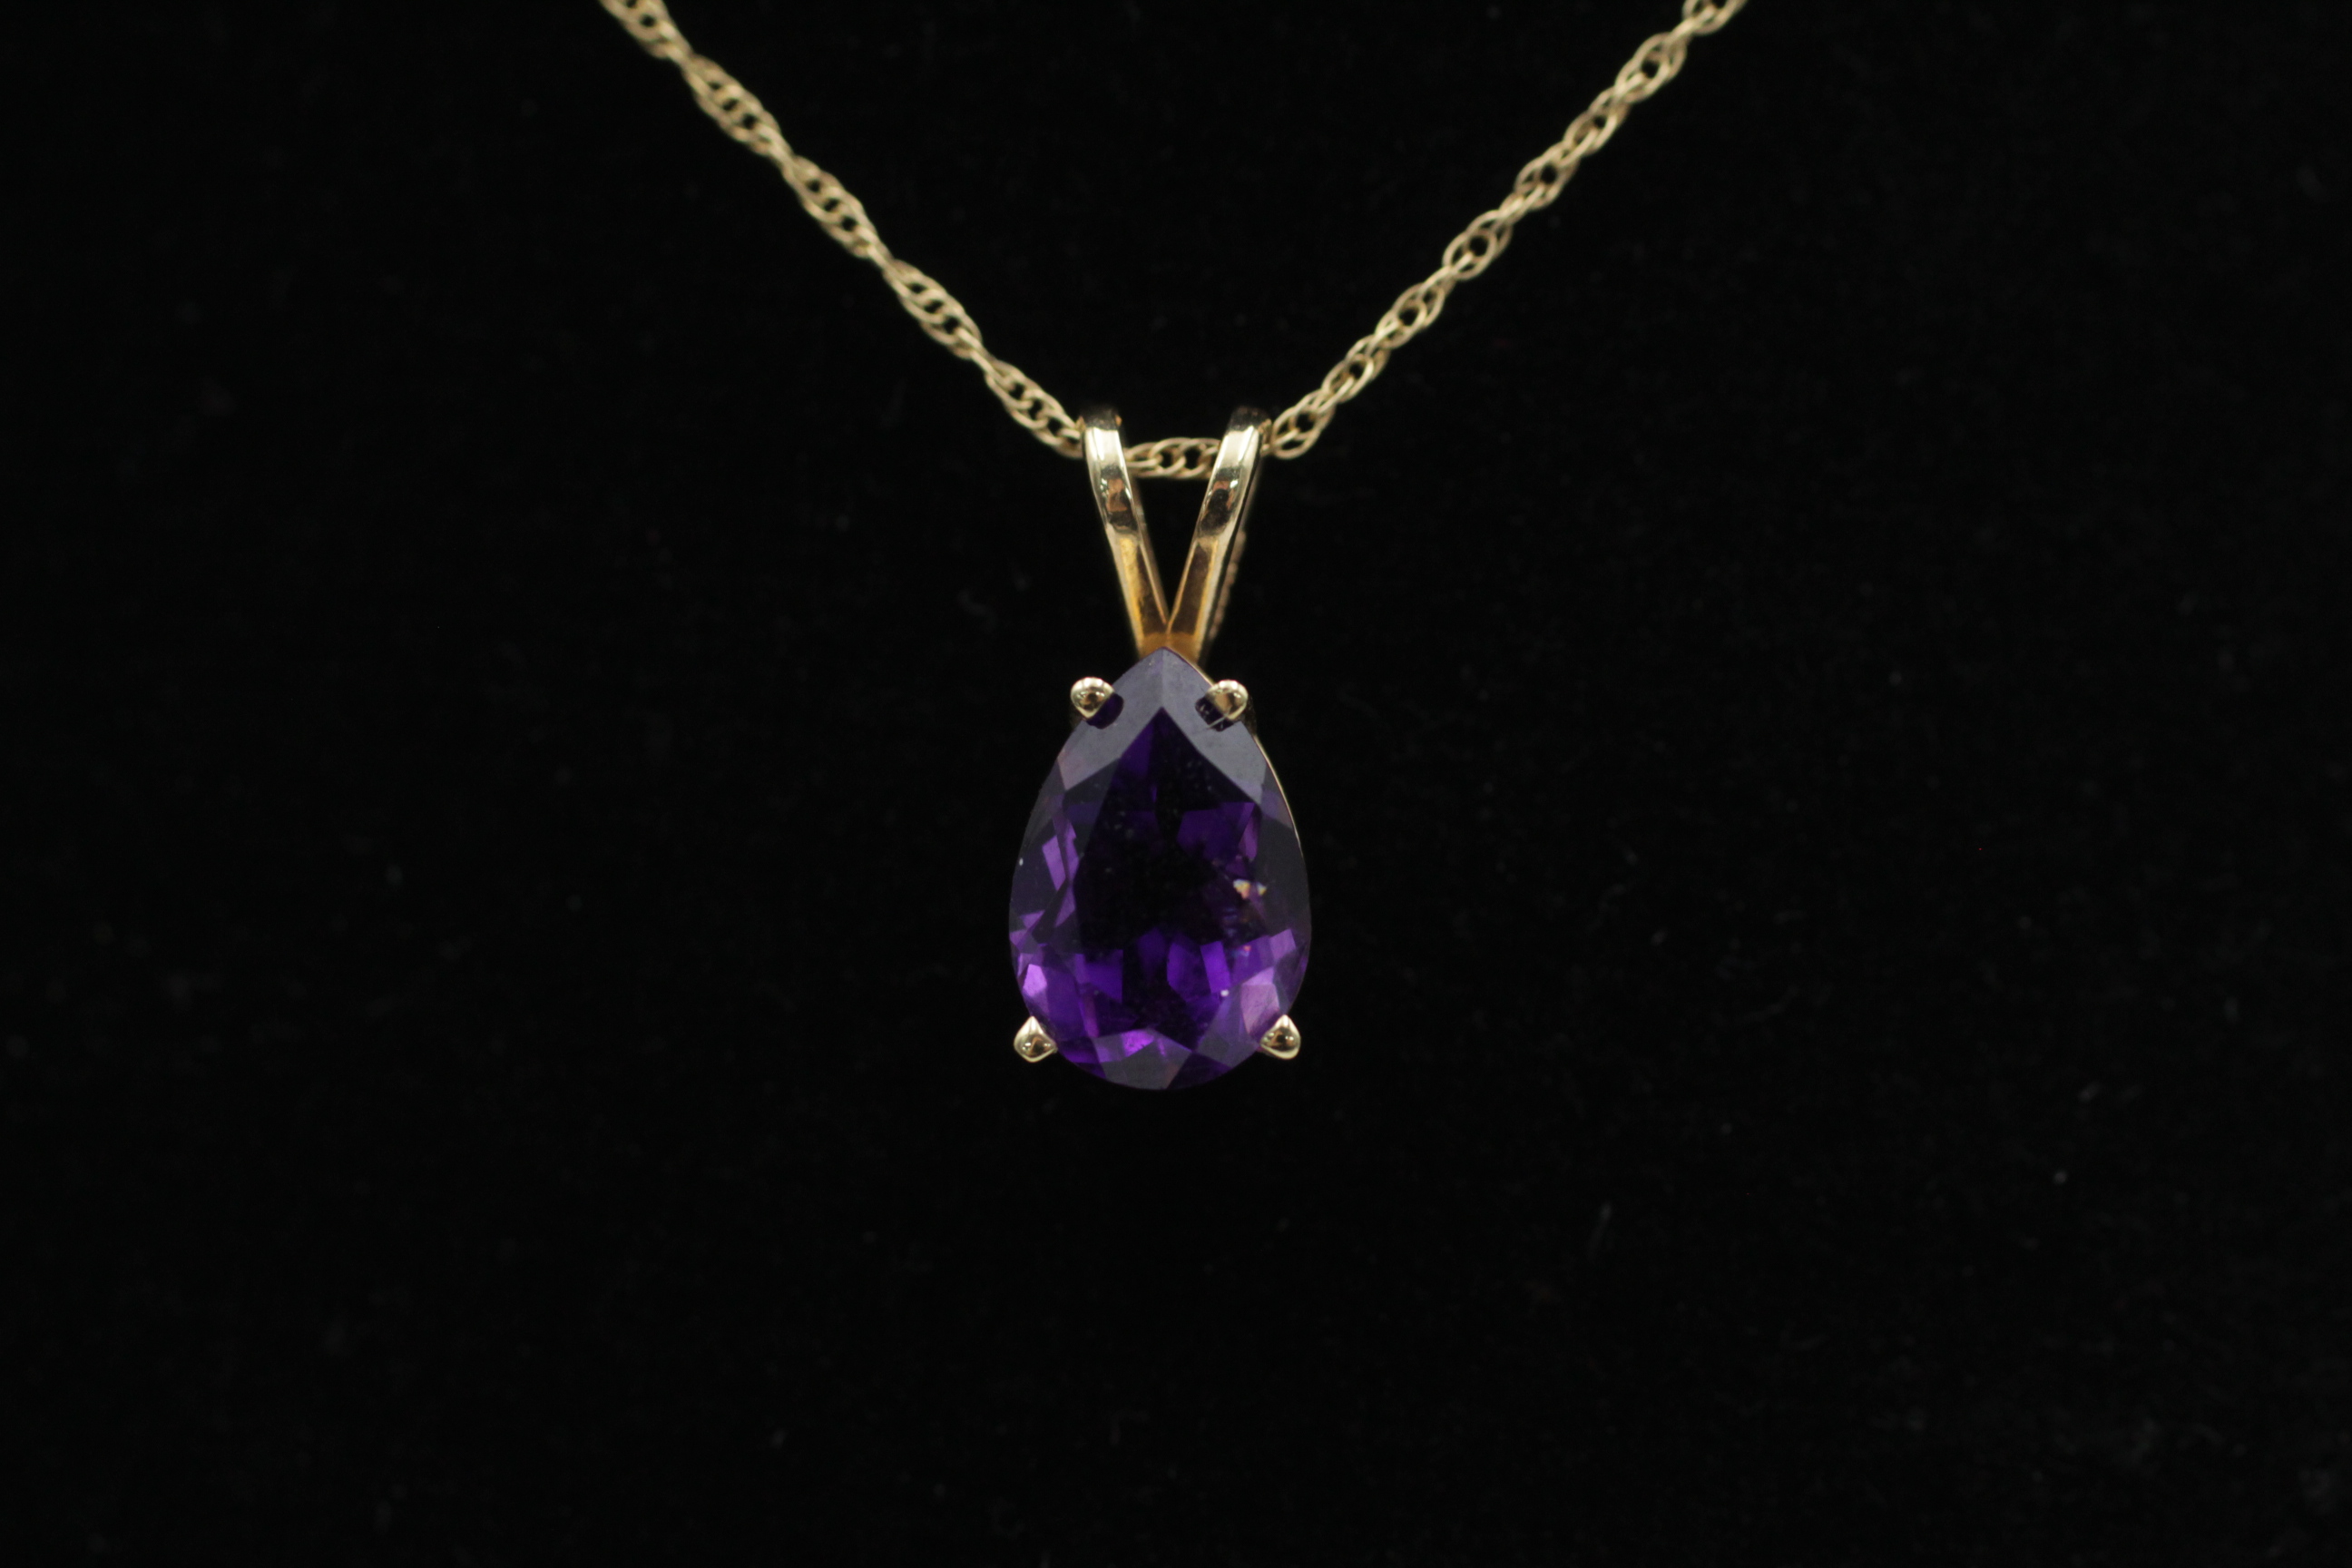 14ct gold amethyst solitaire pendant necklace (1.6g) - Image 2 of 6